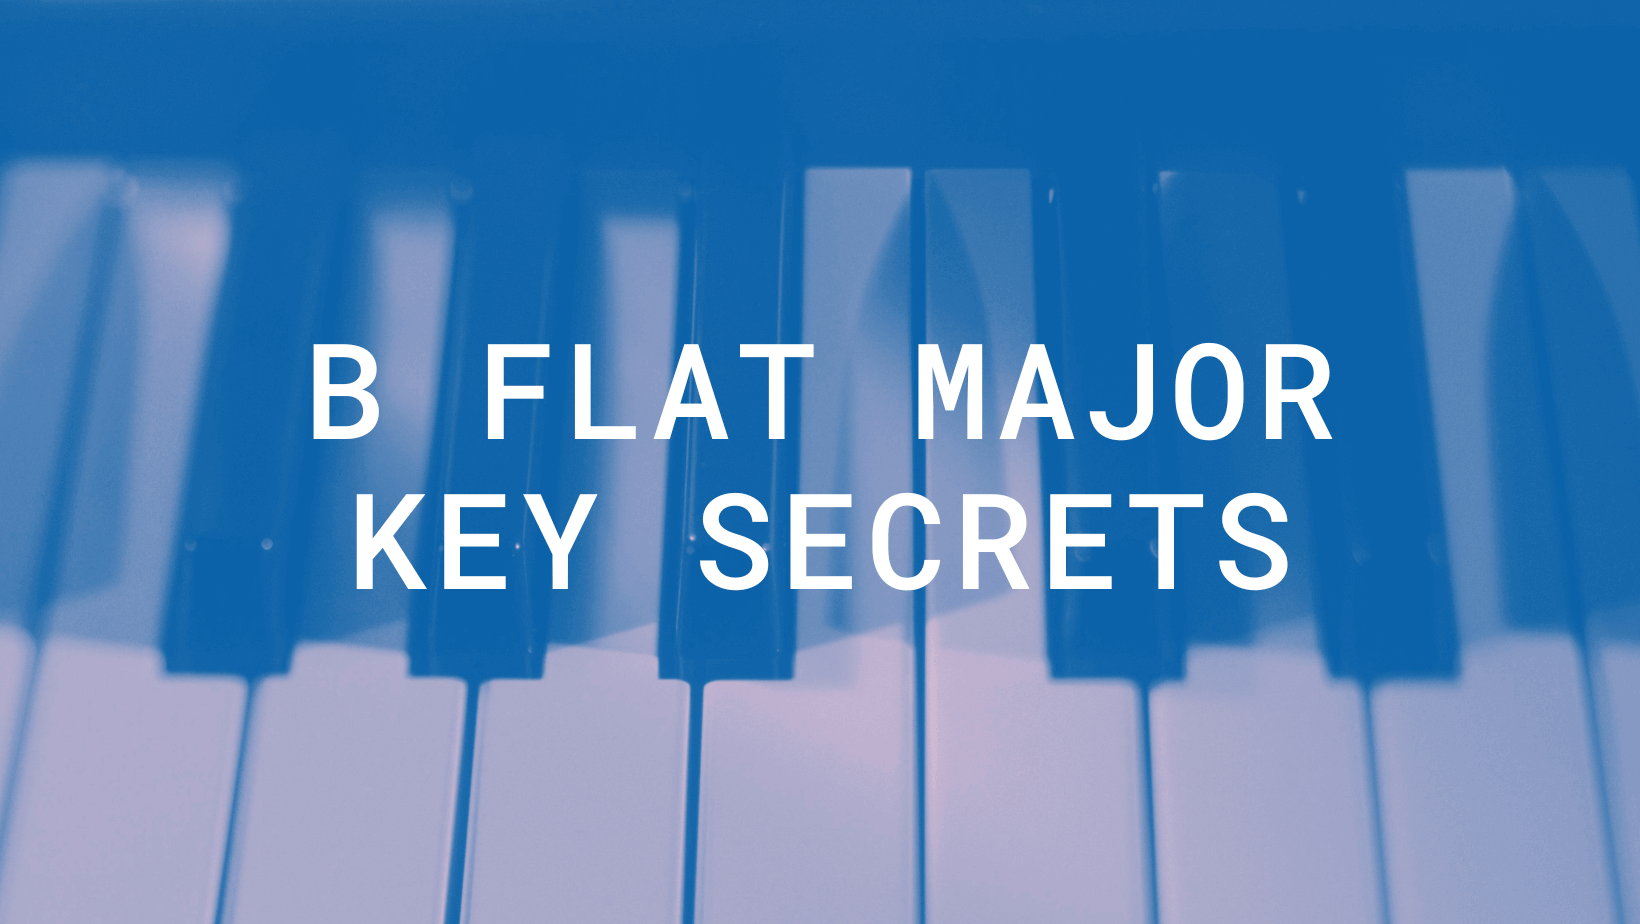 E Flat Major Scale - All About Music Theory